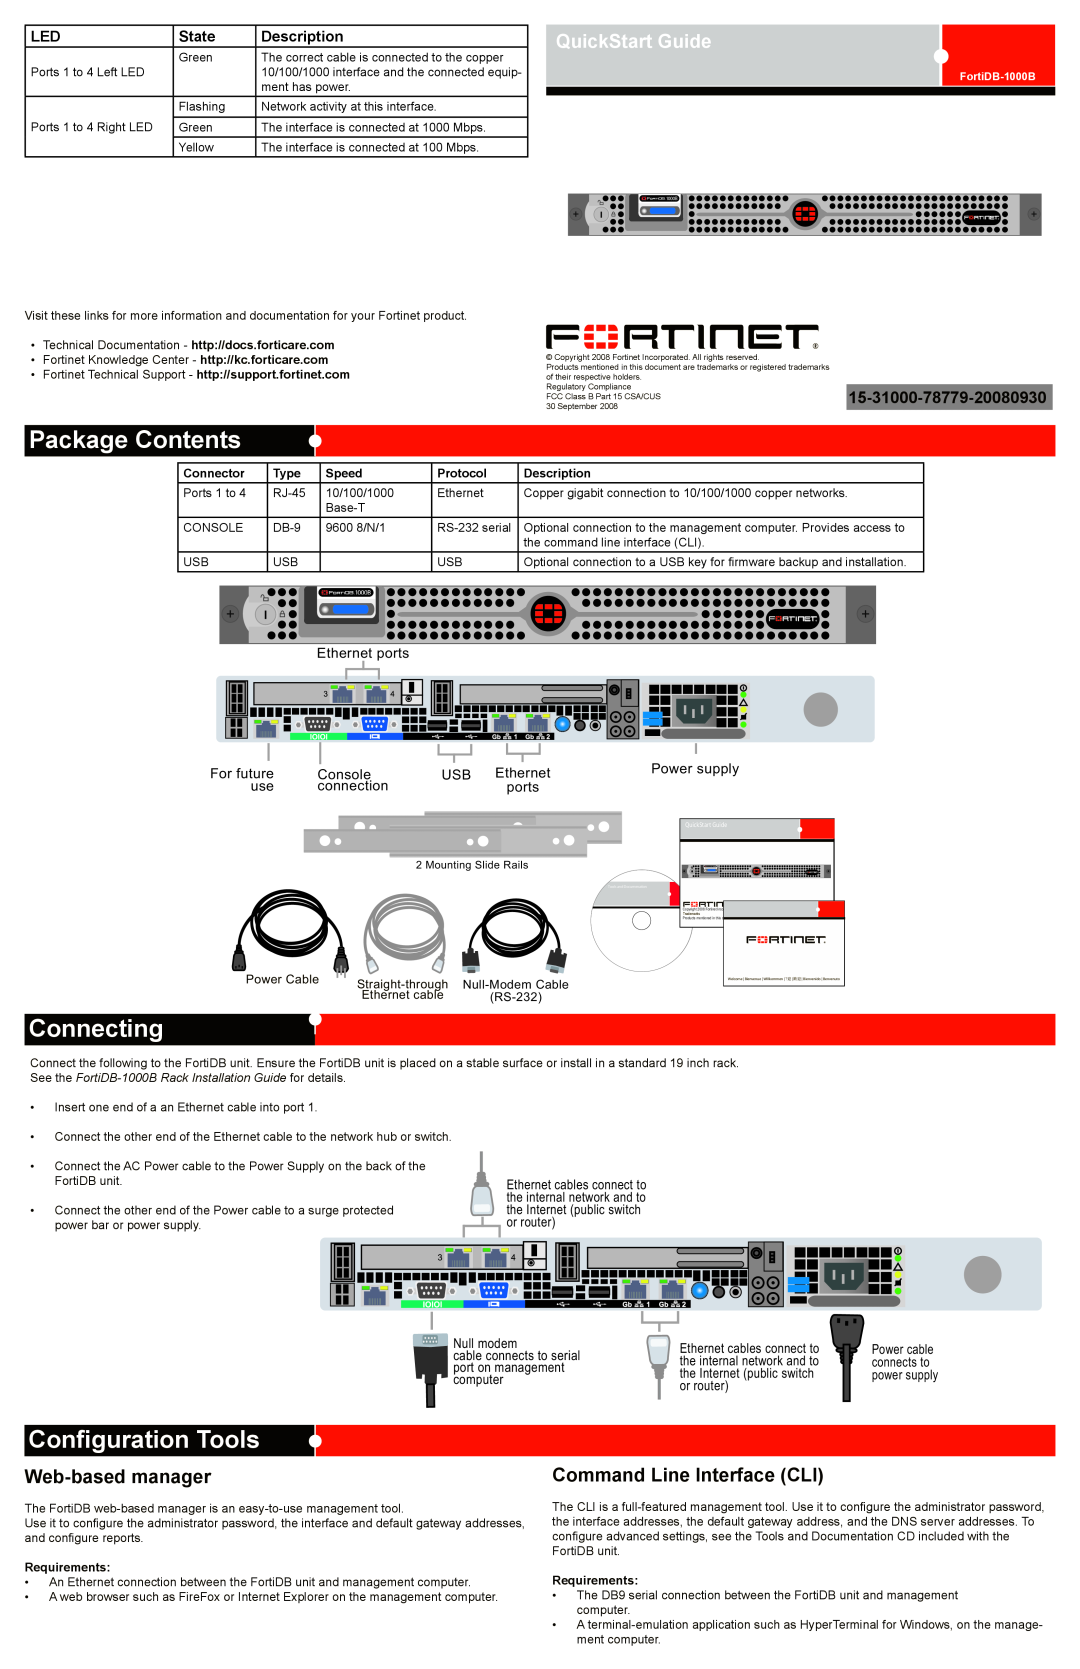 Fortinet FortiDB-1000B quick start Package Contents, Connecting, Configuration Tools, Web-based manager, Connector, Type 